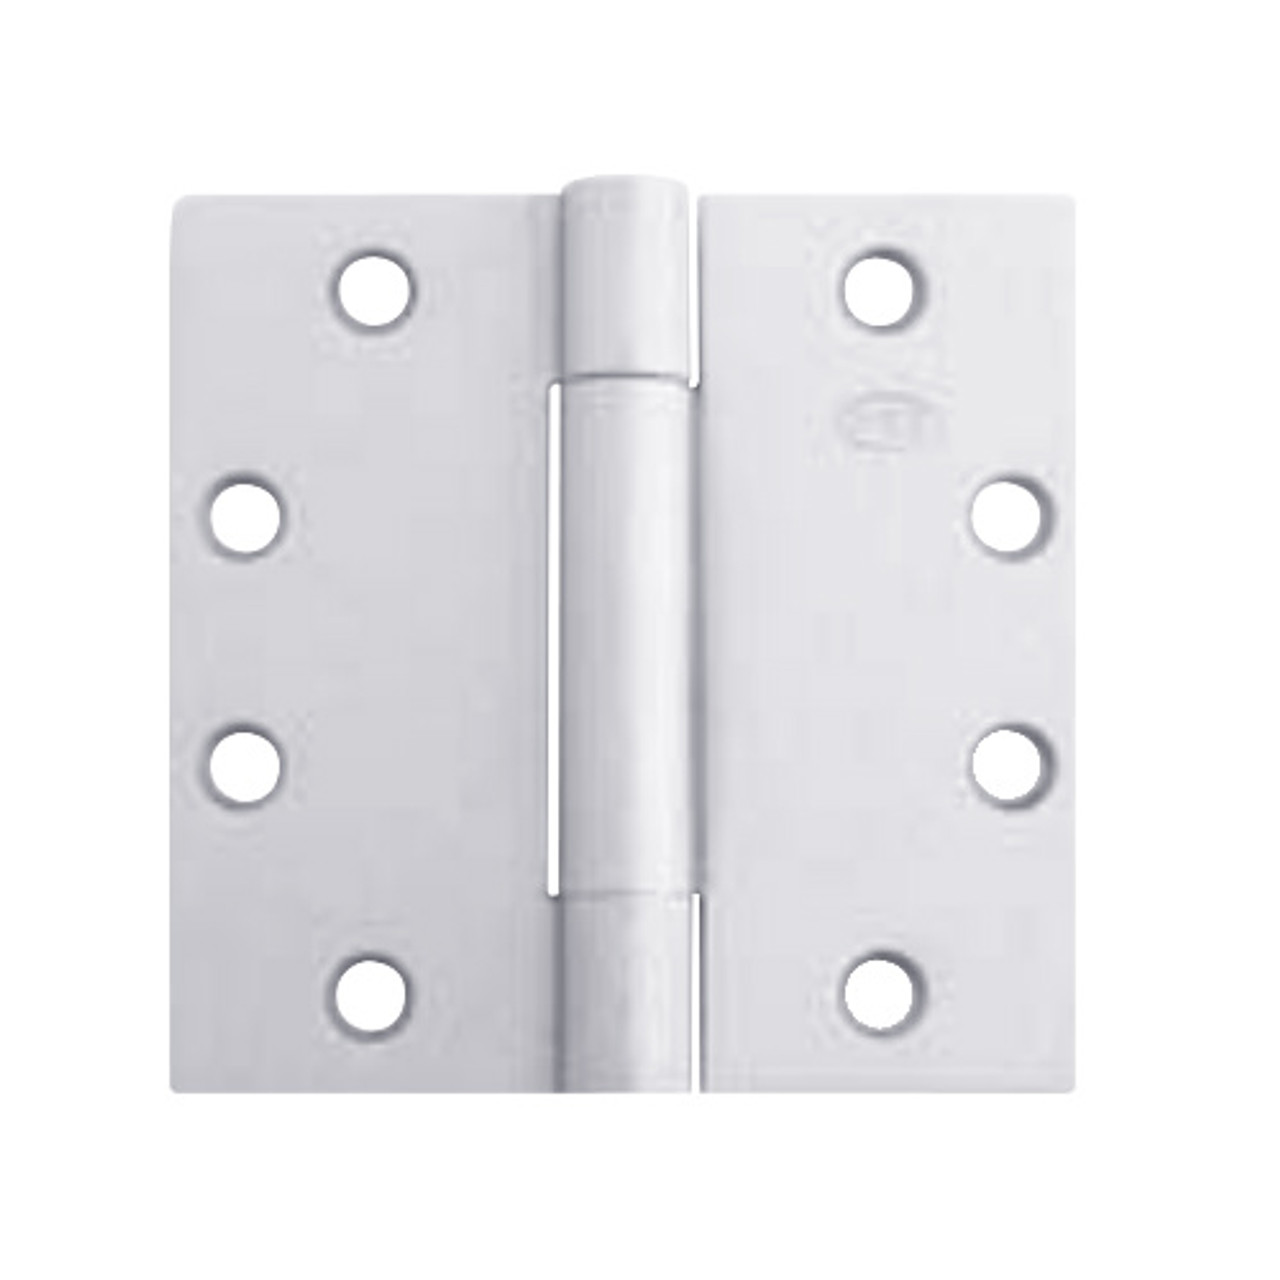 3CB1-5x5-651 IVES 3 Knuckle Concealed Bearing Full Mortise Hinge in Bright Chrome Plated